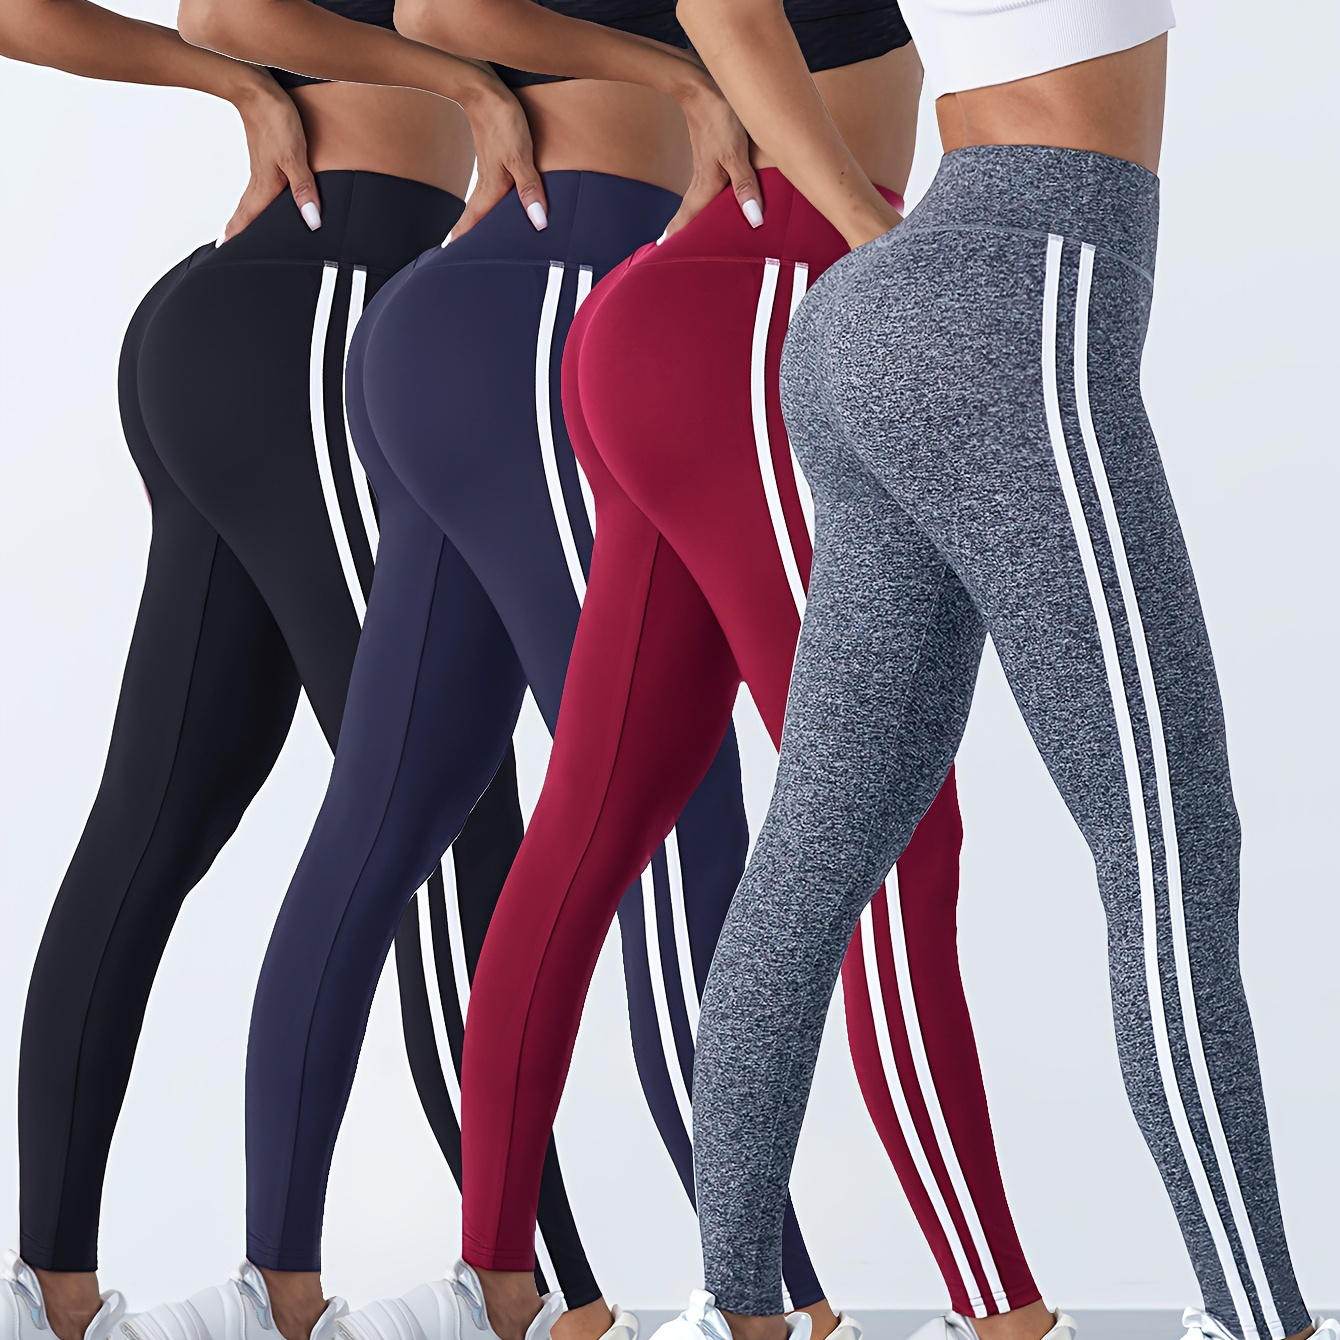 

4pcs Women's Multicolor Side Stripe Sports Leggings, Yoga Running Casual Tights, Basic Style, Stretchy Workout Pants For Outdoor And Gym Use Wide Waistband